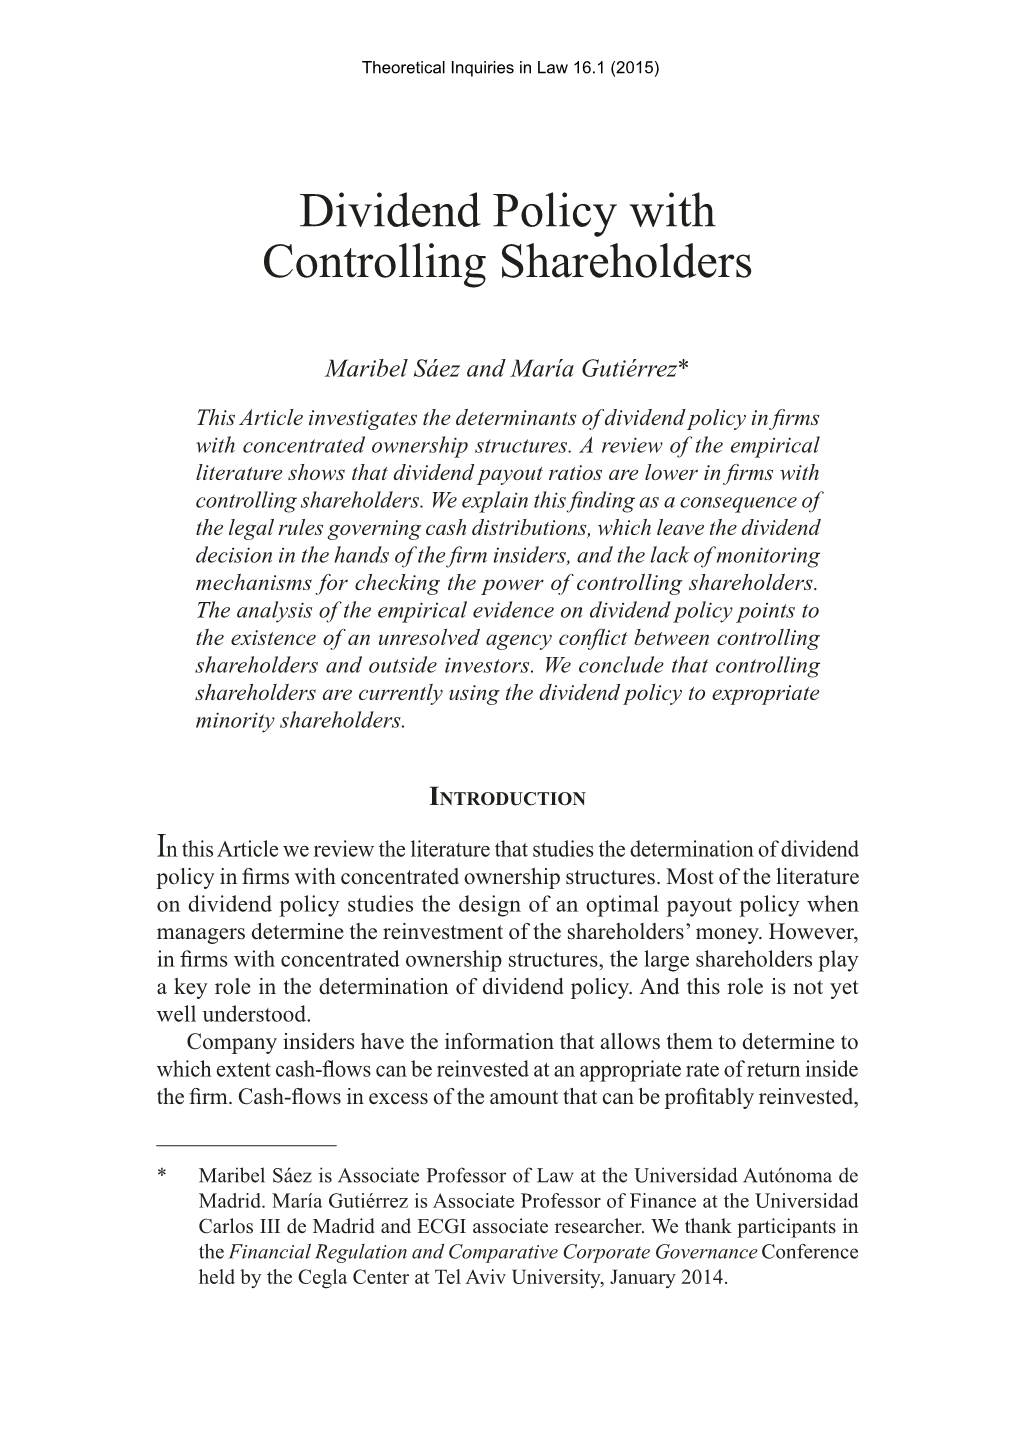 Dividend Policy with Controlling Shareholders